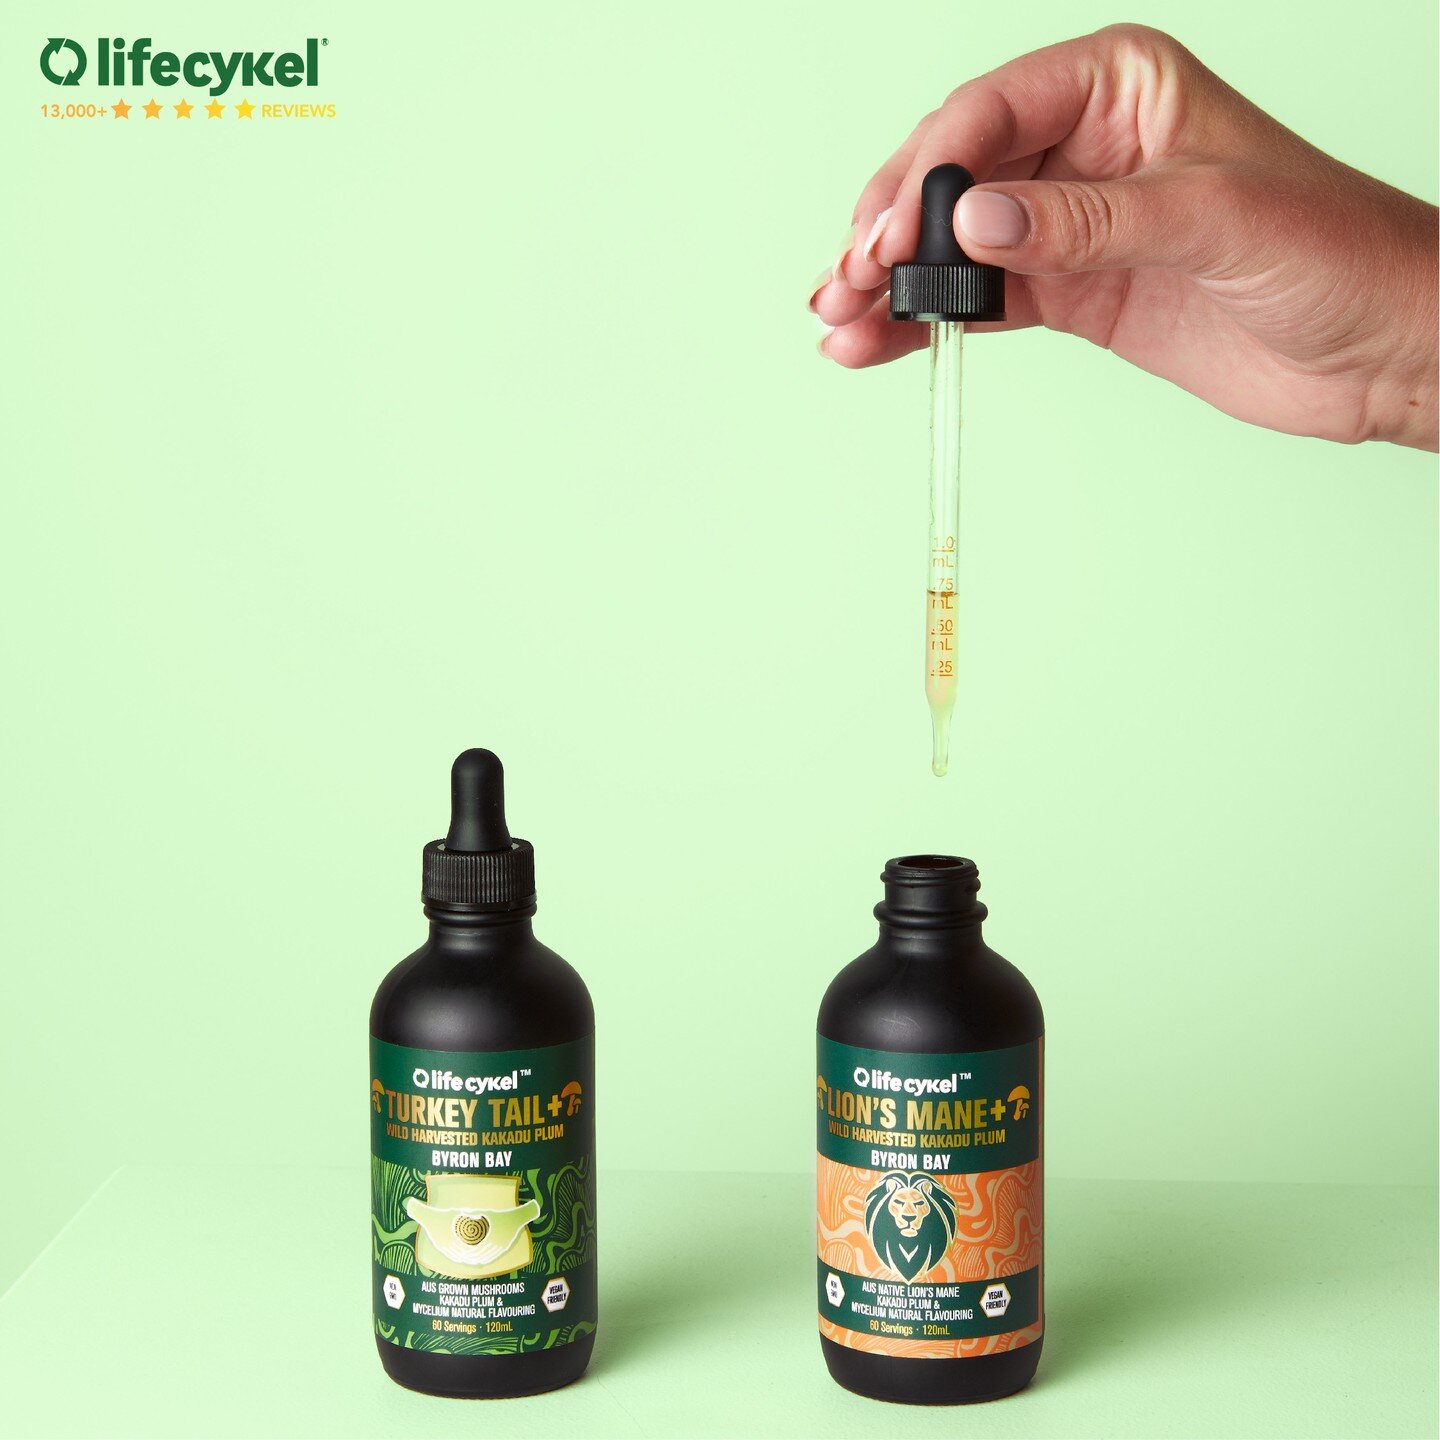 I have been using the entire LifeCykel range for 2 months now and in this time I have had huge improvements in my ADHD symptoms, sleep and gut health. So much so that I have drastically reduced the use of my stimulant medication. If you are looking t